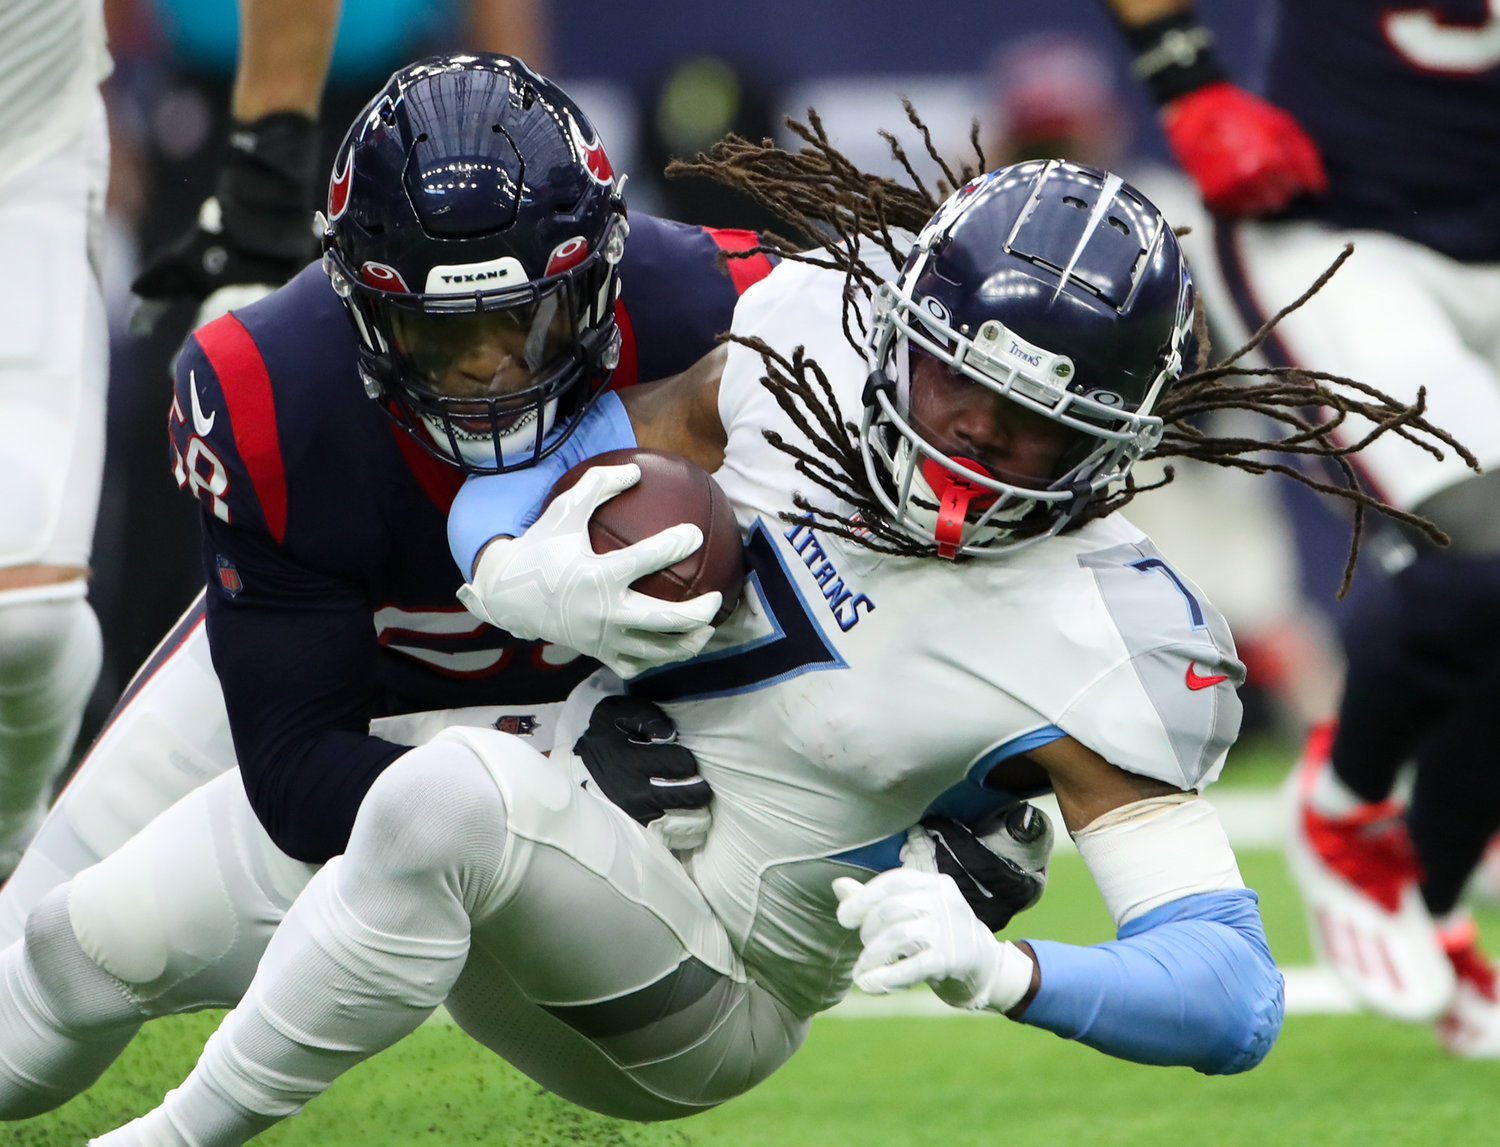 Tennessee Titans running back D'Onta Foreman (7) is tackled by Houston Texans middle linebacker Christian Kirksey (58) during an NFL game between the Texans and the Titans on Jan. 9, 2022 in Houston, Texas.